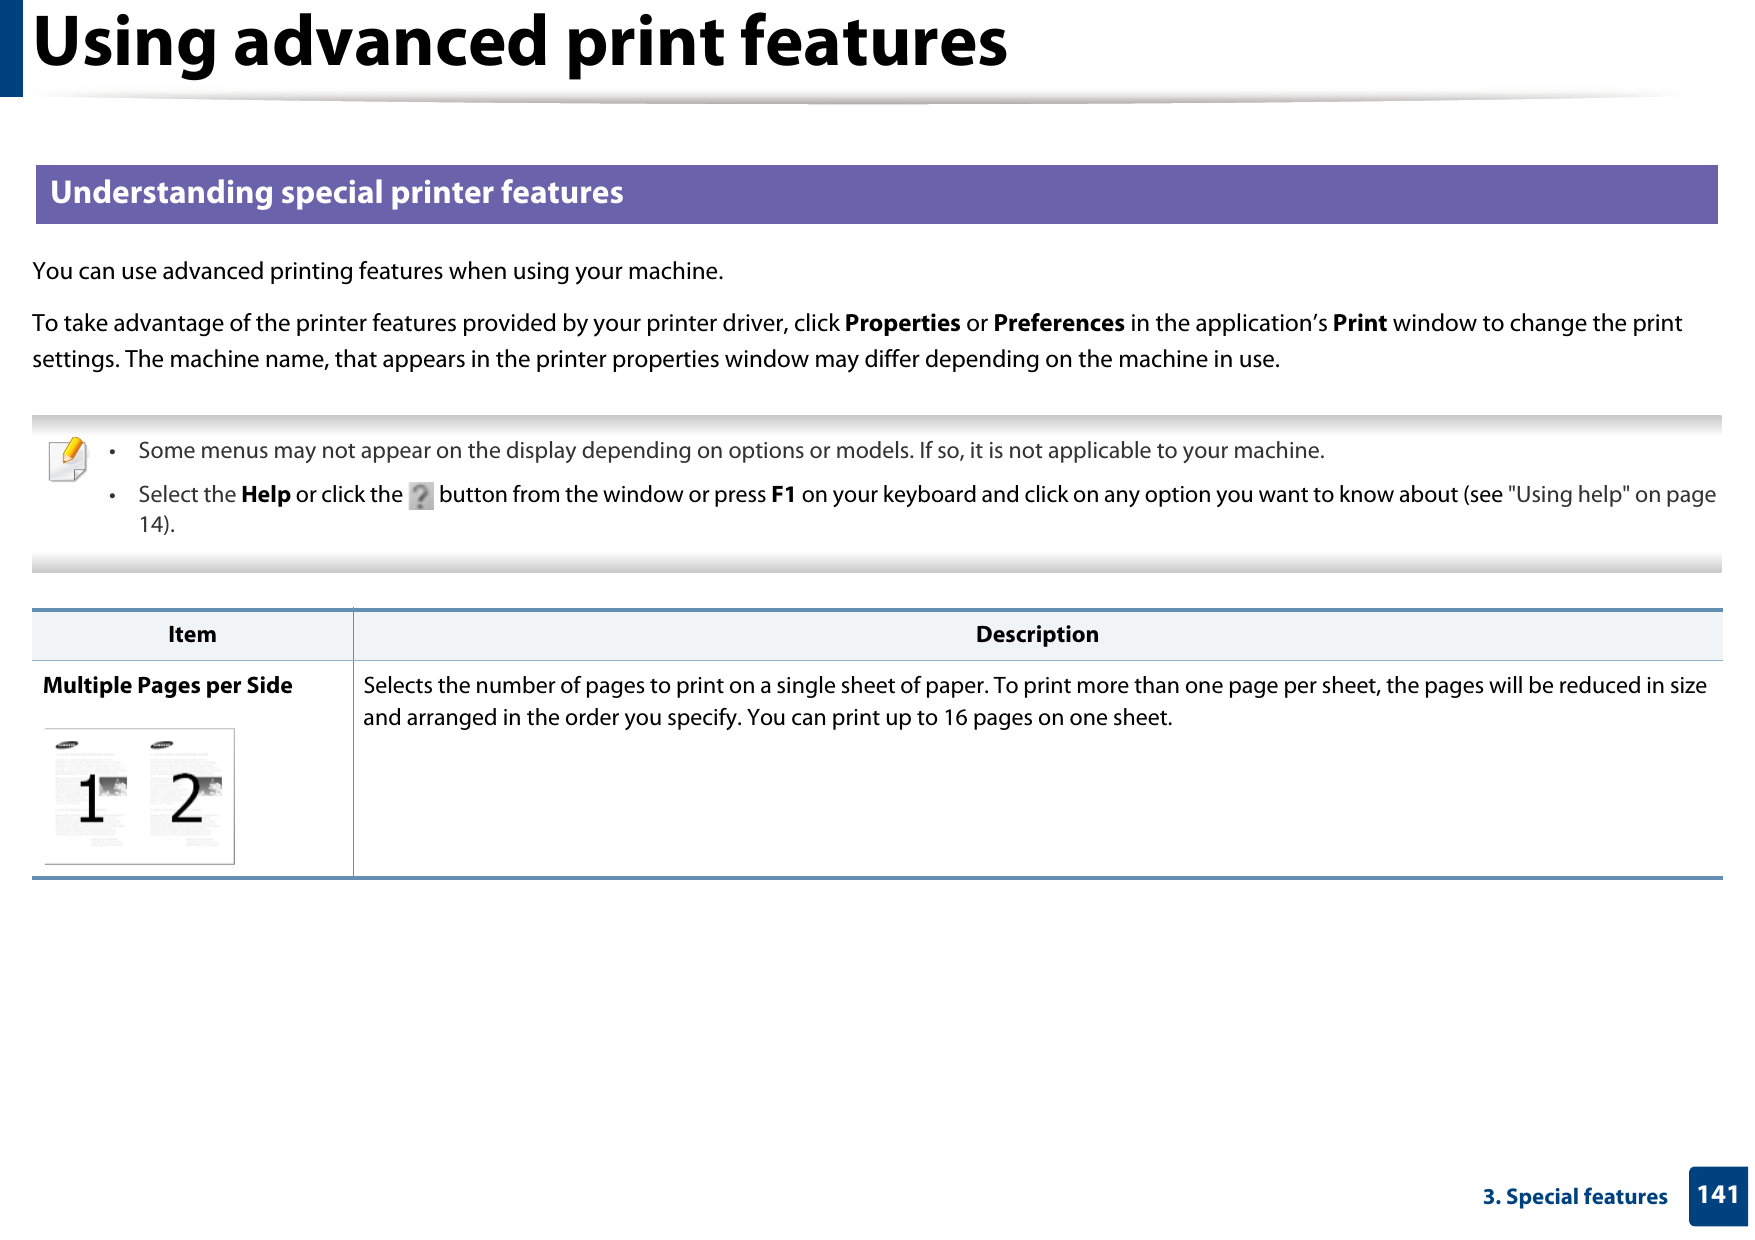 Using advanced print features1413. Special features2 Understanding special printer featuresYou can use advanced printing features when using your machine.To take advantage of the printer features provided by your printer driver, click Properties or Preferences in the application’s Print window to change the print settings. The machine name, that appears in the printer properties window may differ depending on the machine in use. • Some menus may not appear on the display depending on options or models. If so, it is not applicable to your machine.• Select the Help or click the   button from the window or press F1 on your keyboard and click on any option you want to know about (see &quot;Using help&quot; on page 14).  Item DescriptionMultiple Pages per Side Selects the number of pages to print on a single sheet of paper. To print more than one page per sheet, the pages will be reduced in size and arranged in the order you specify. You can print up to 16 pages on one sheet. 